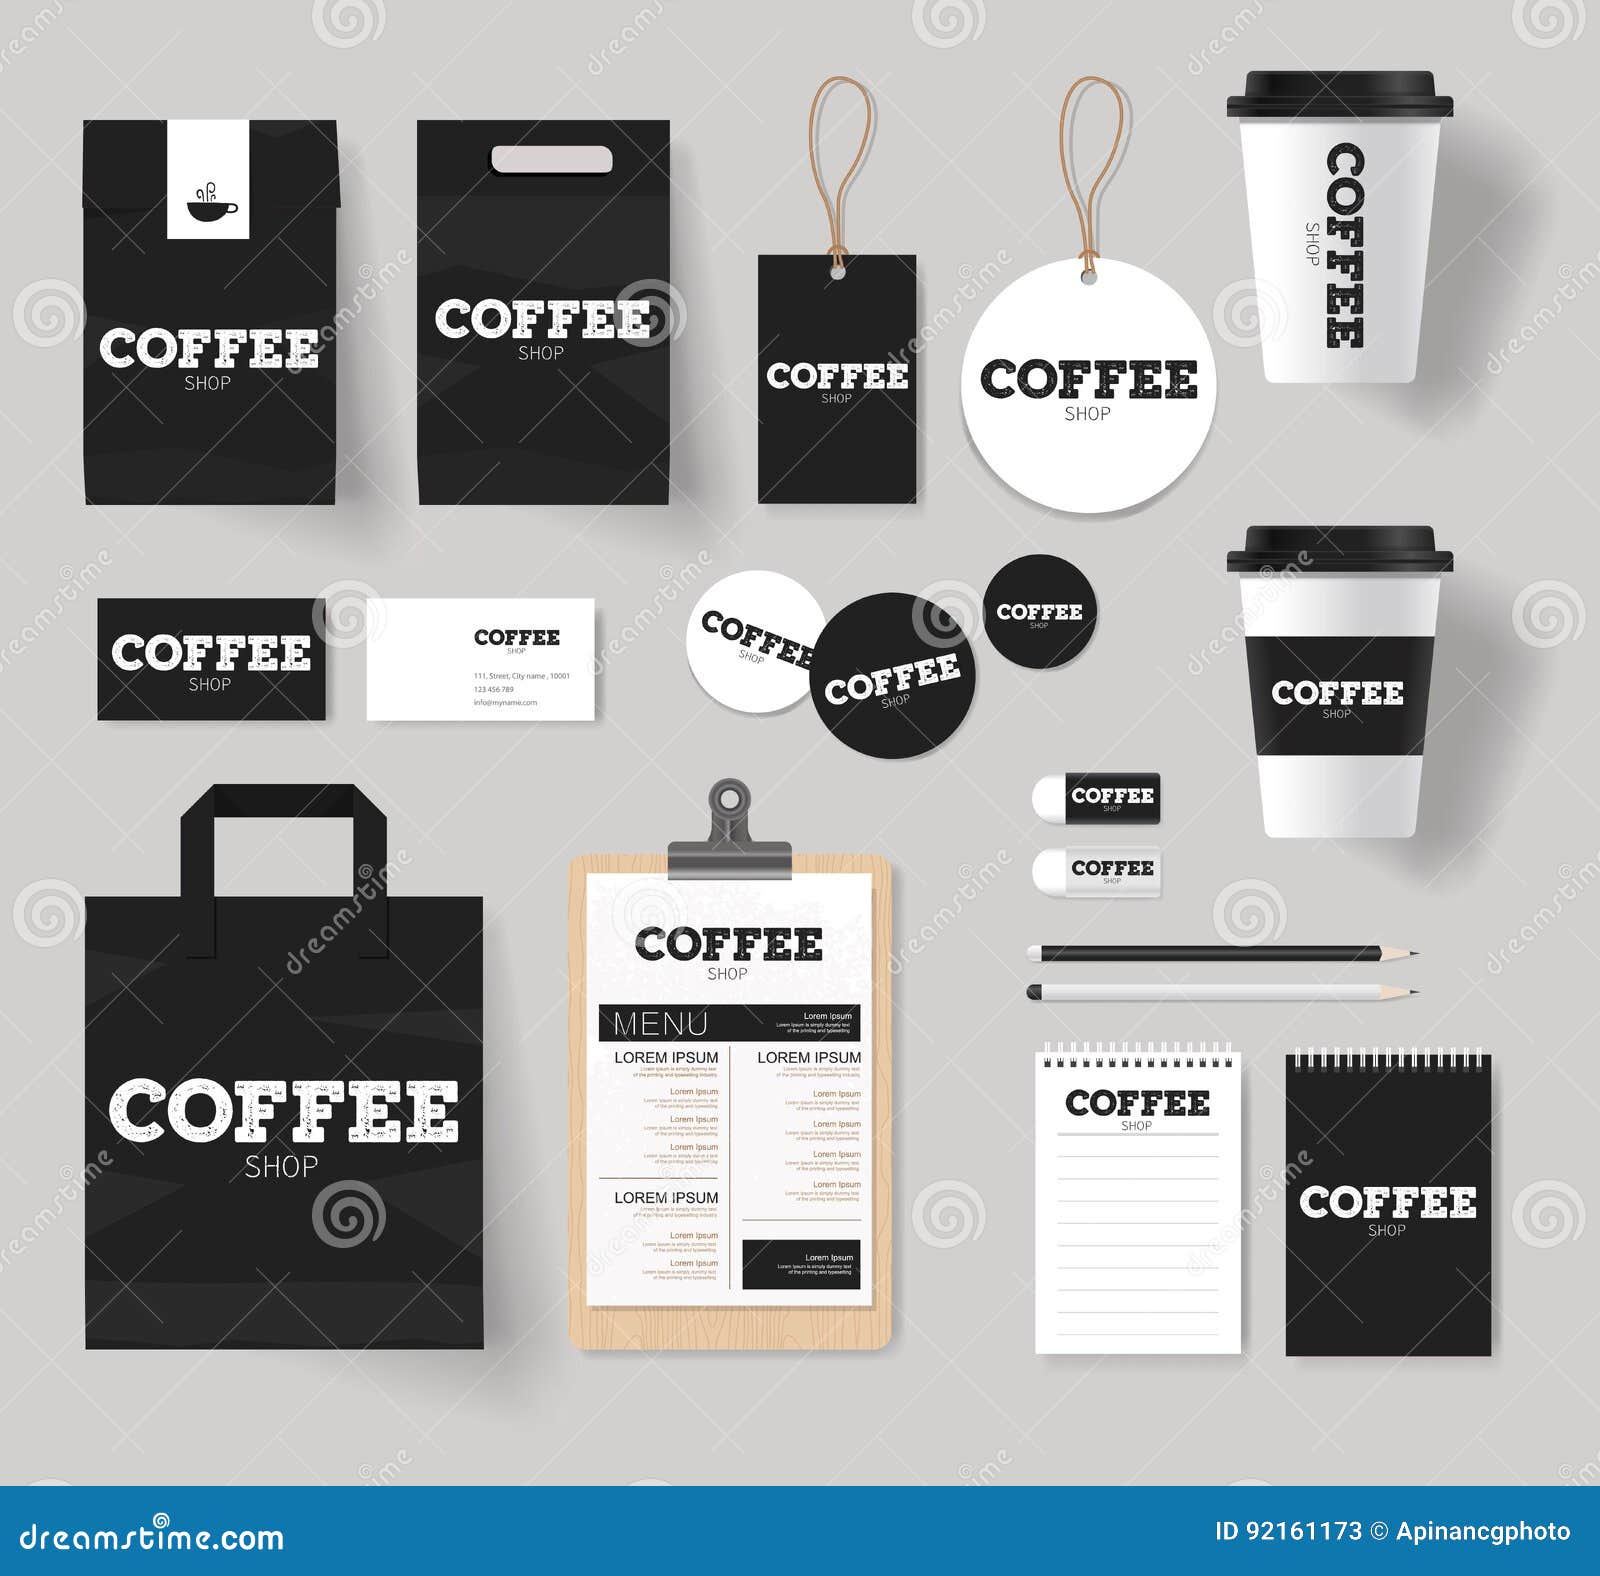 Corporate Branding Identity For Coffee Shop And Restaurant Mock Up Stock Vector Illustration Of Cafe Concept 92161173